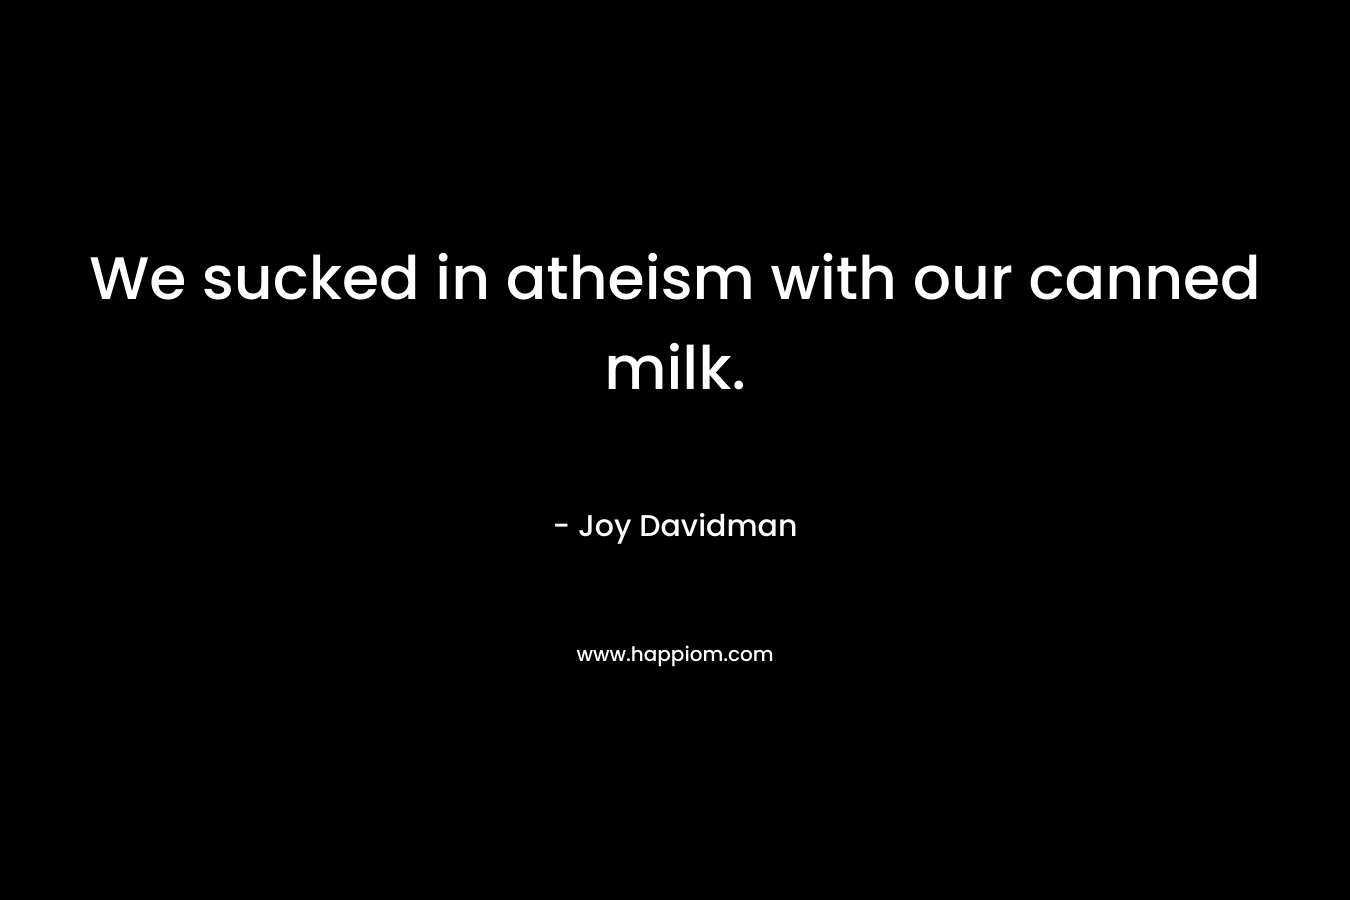 We sucked in atheism with our canned milk. – Joy Davidman